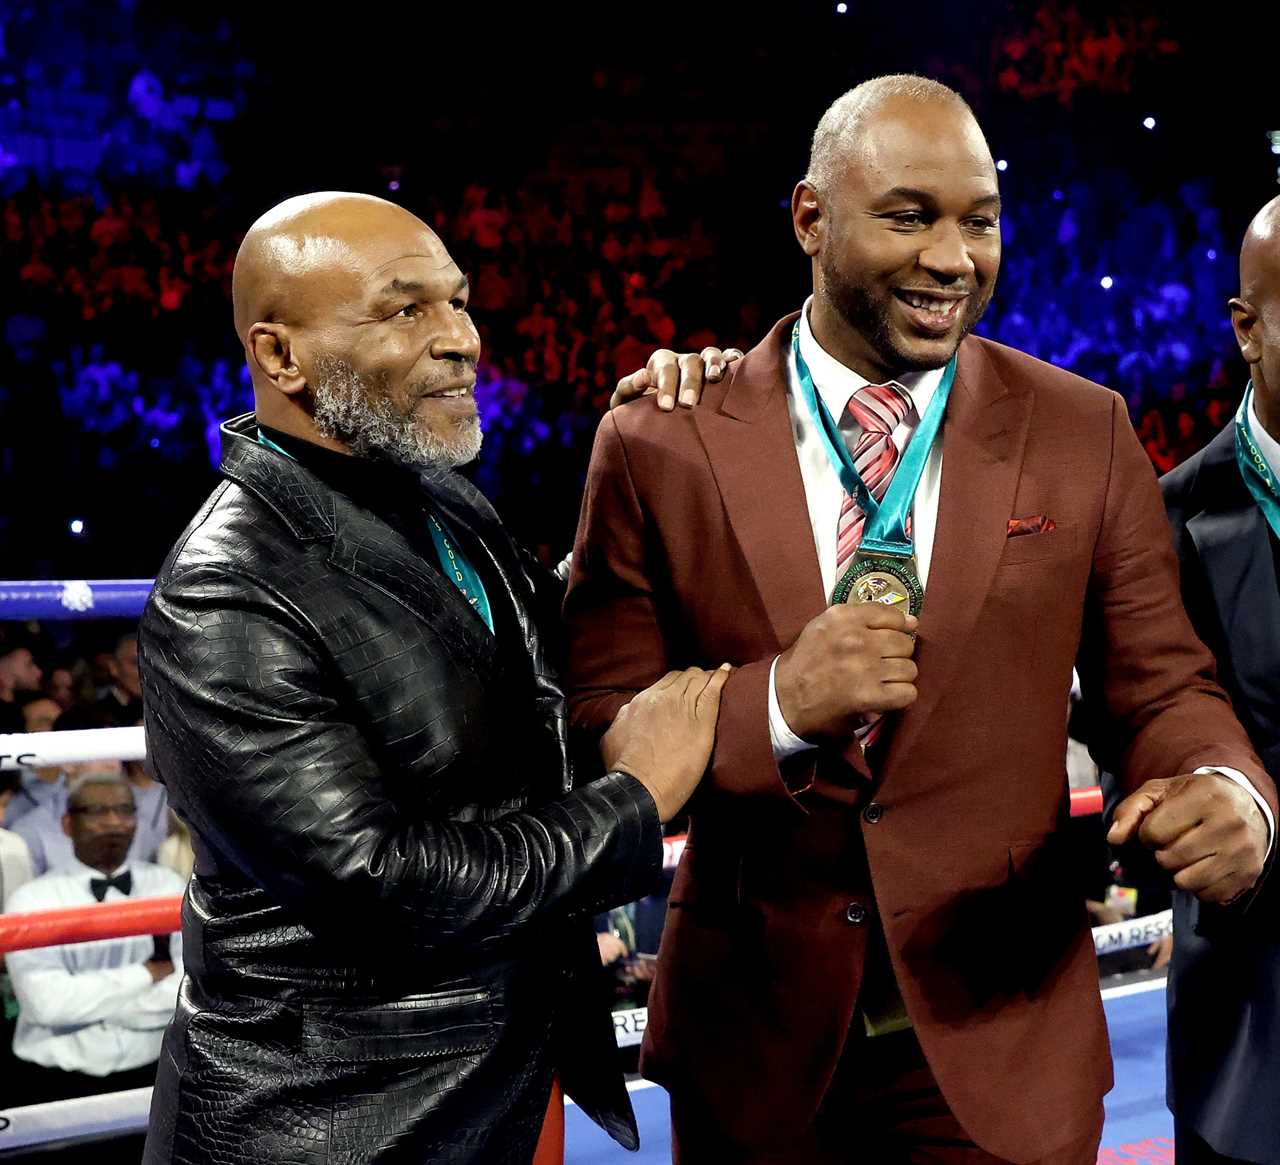 Mike Tyson announces that he will face Lennox Lewis, an old foe, in September.